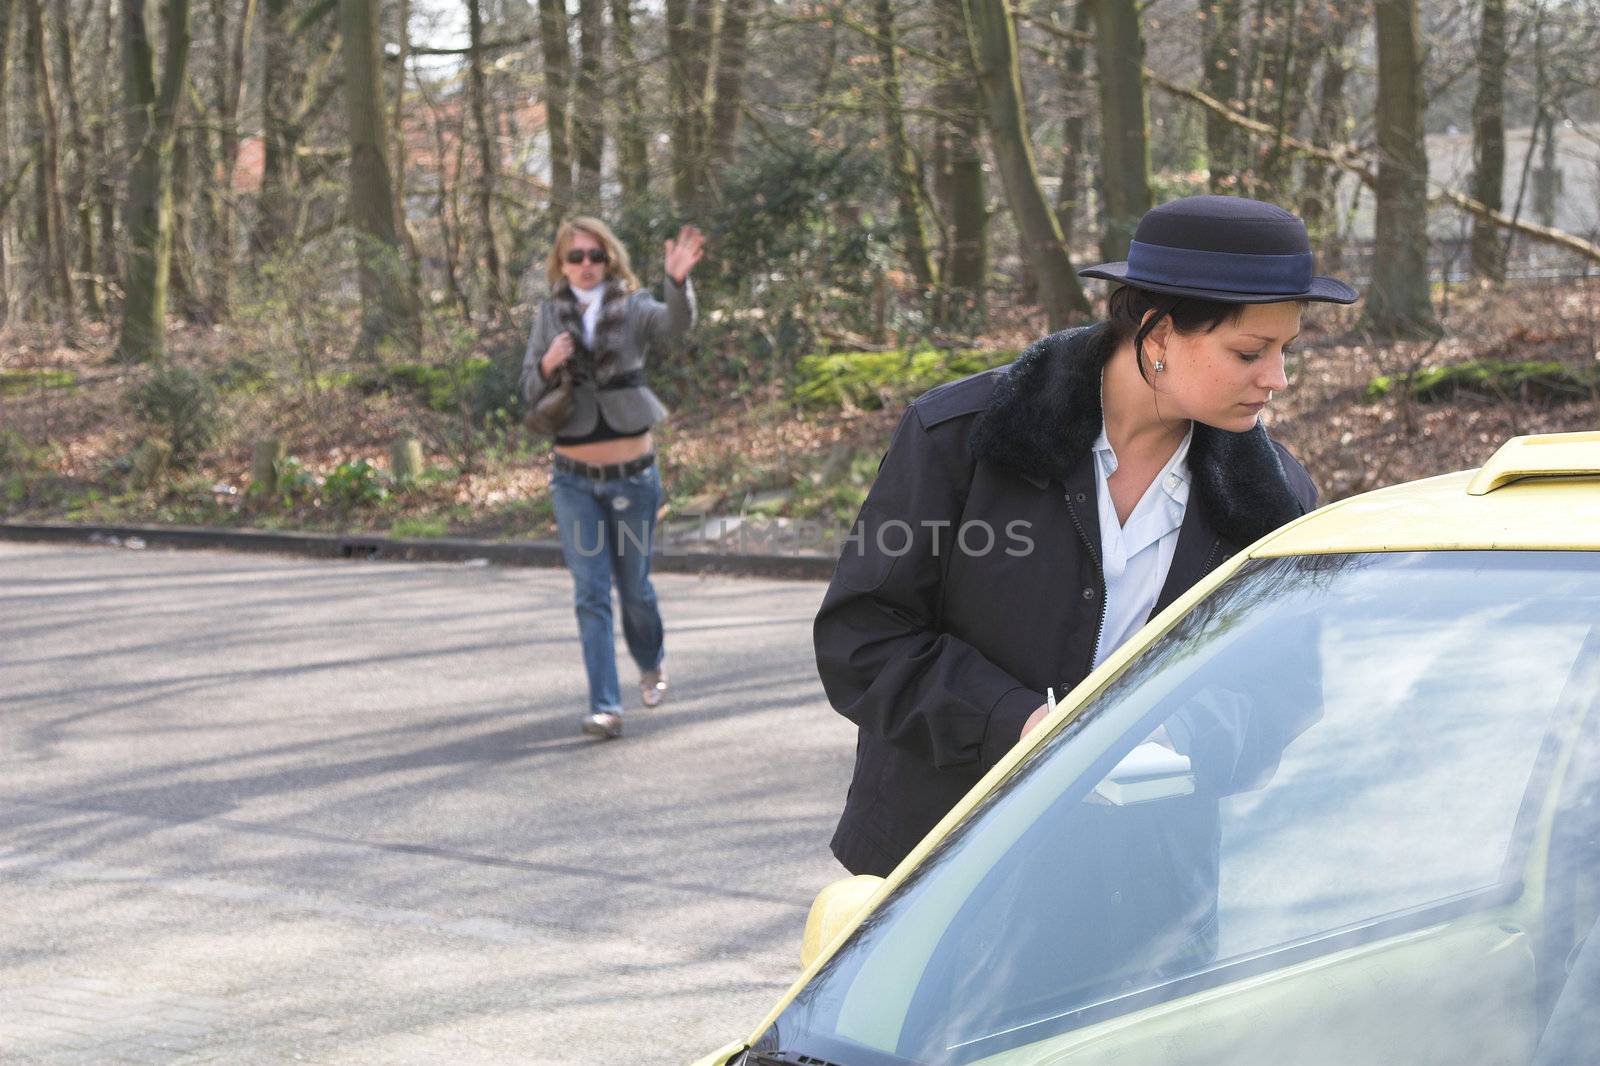 Female police officer peering inside a car to see if there is a parking ticket available. The owner of the car is running towards her